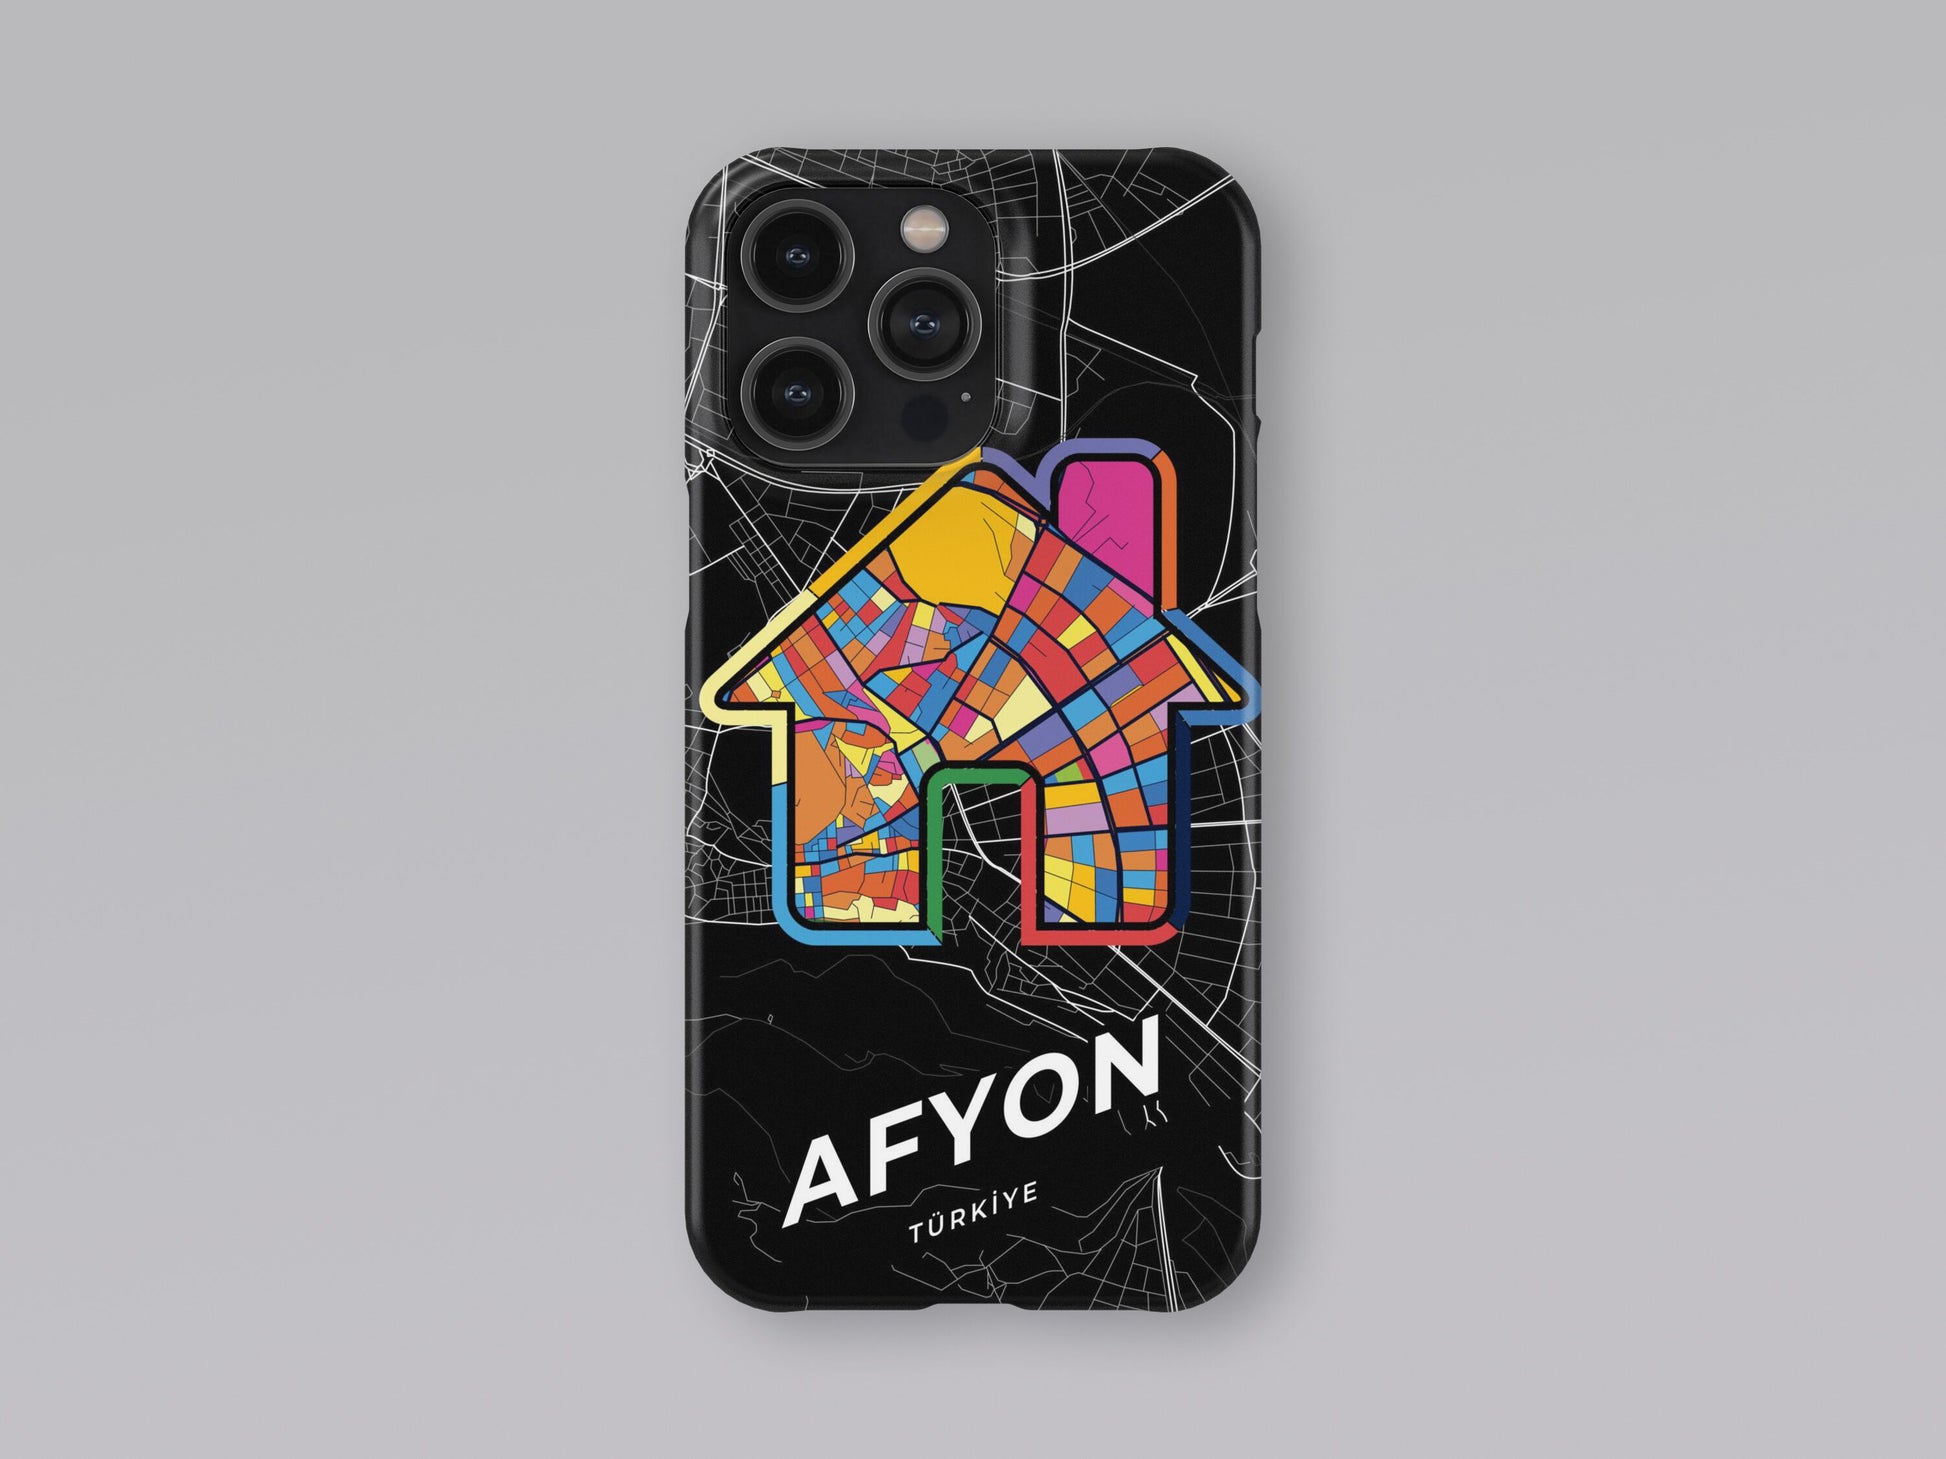 Afyon Turkey slim phone case with colorful icon. Birthday, wedding or housewarming gift. Couple match cases. 3